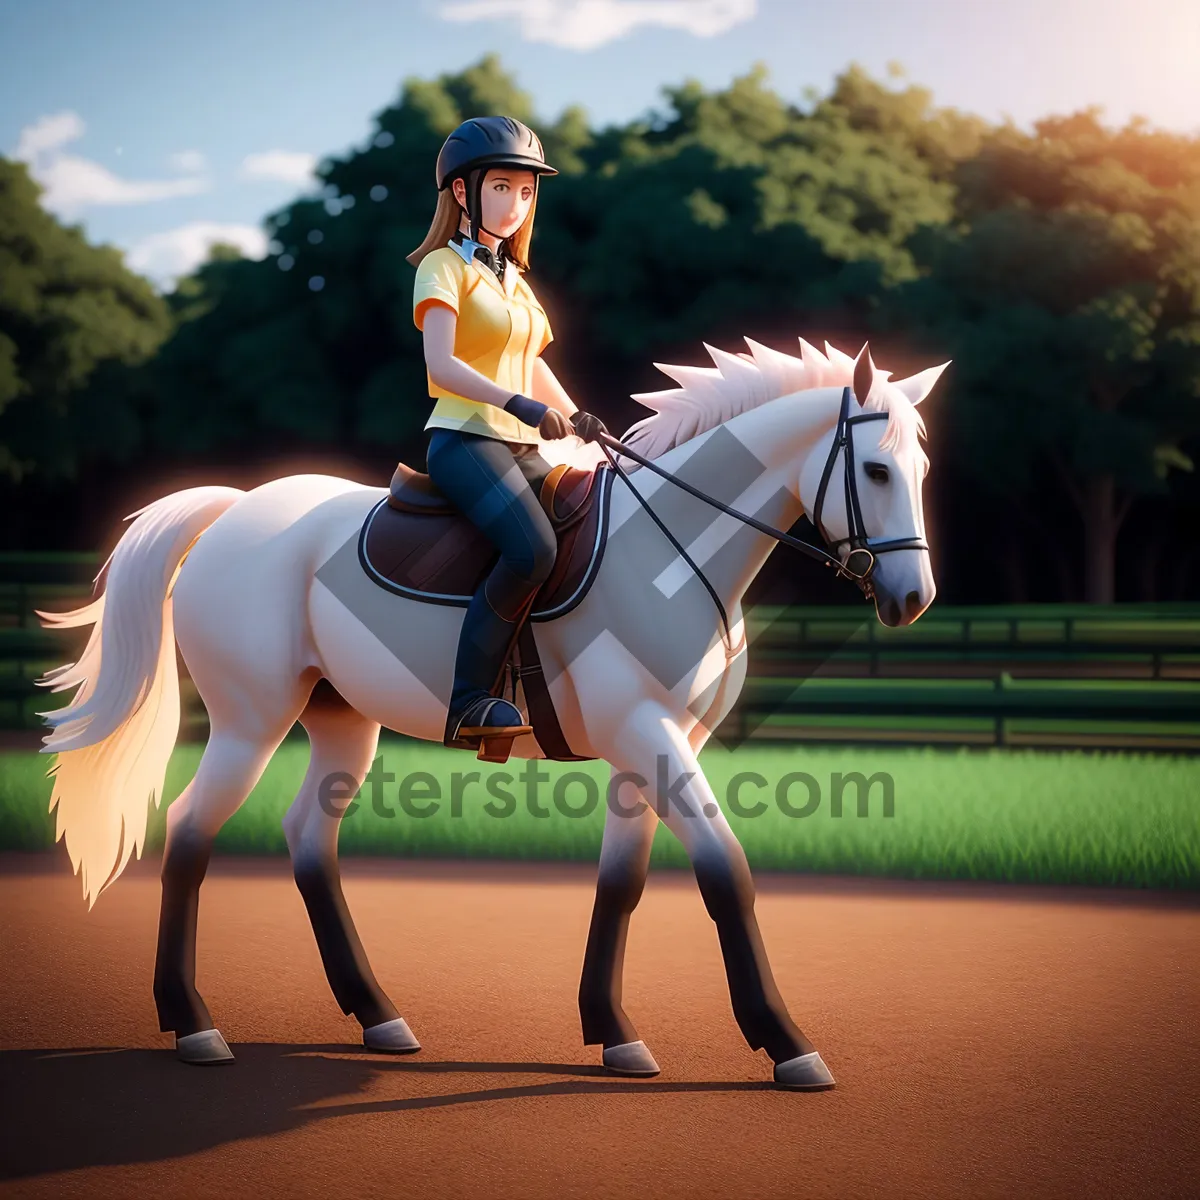 Picture of Equestrian Javelin: Dynamic Horseback Rider with Spear